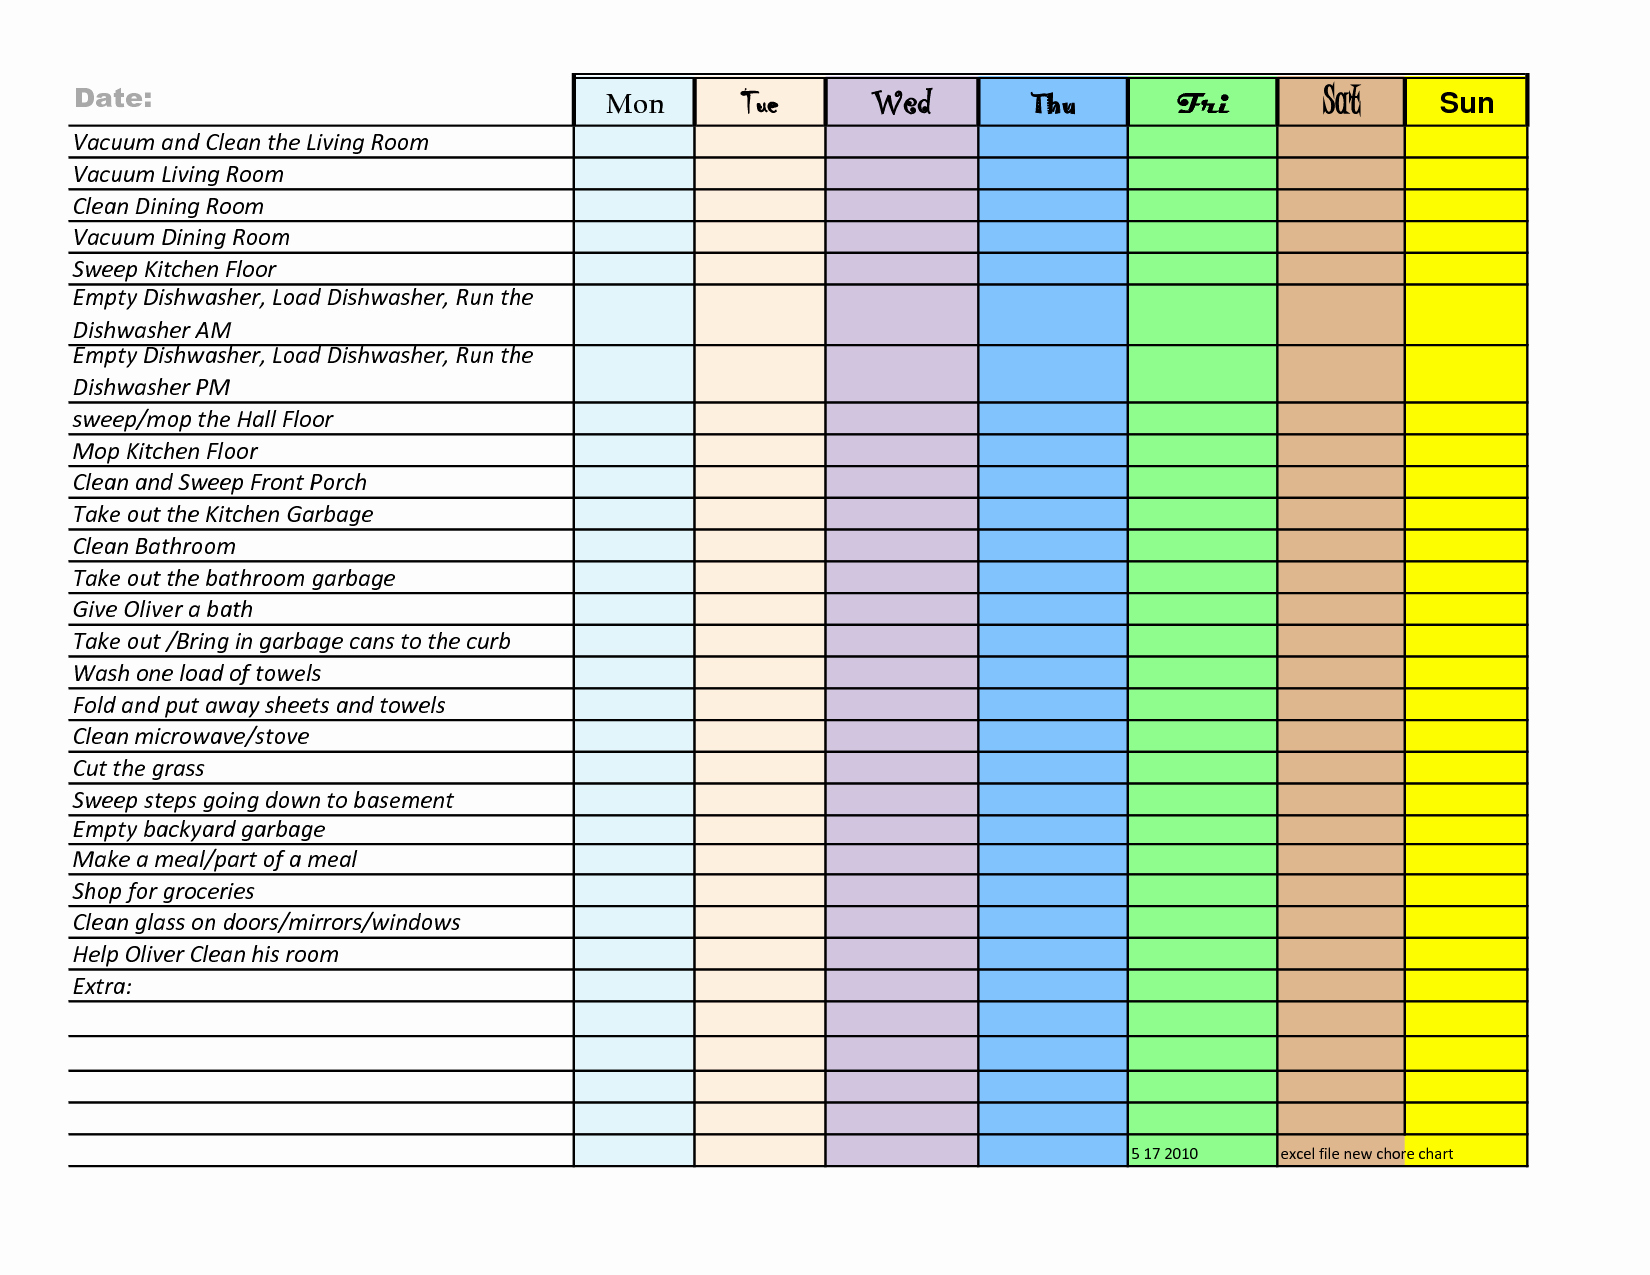 Downloadable Family Chore Chart Template